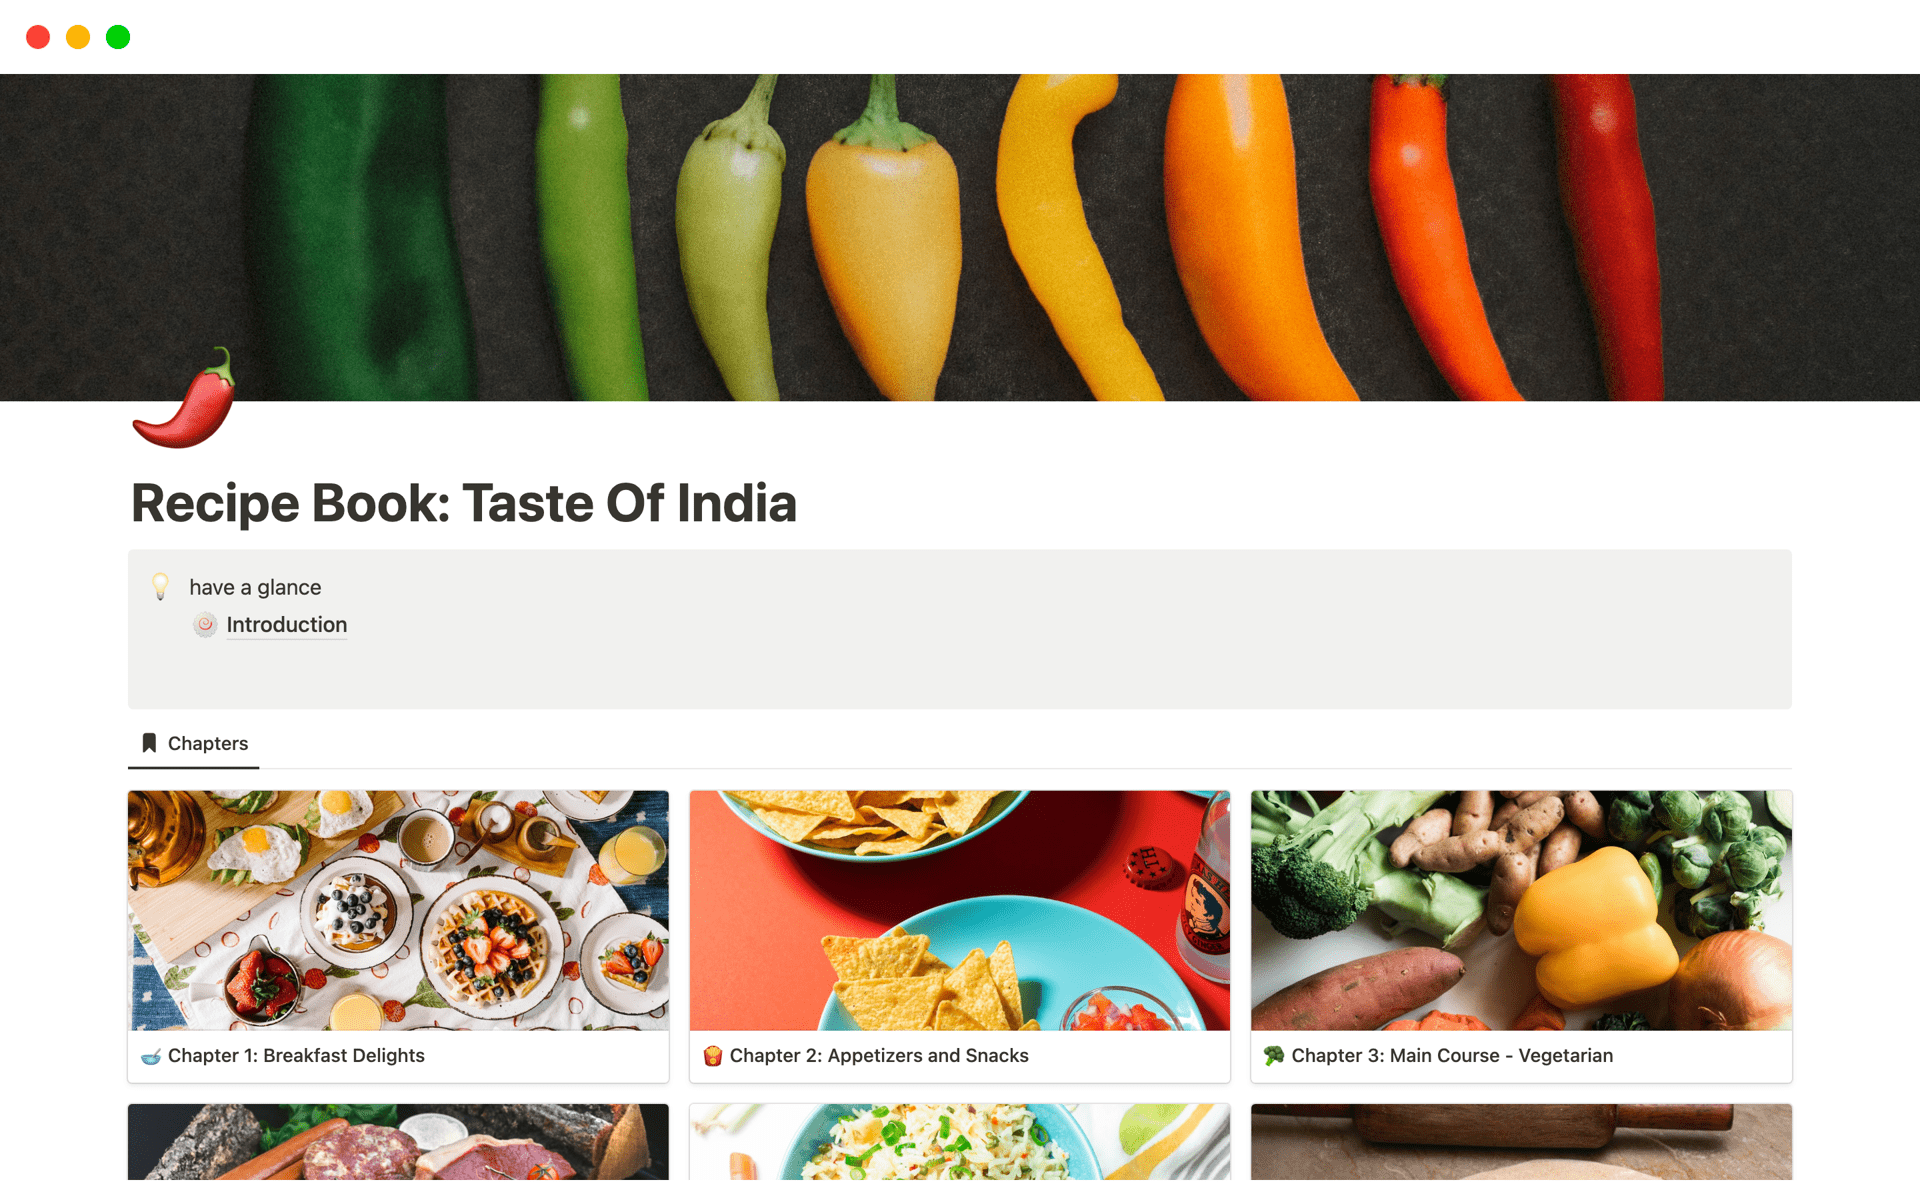 Transform your kitchen into a culinary haven with 'Taste of India: 100+ Dishes with Recipes'